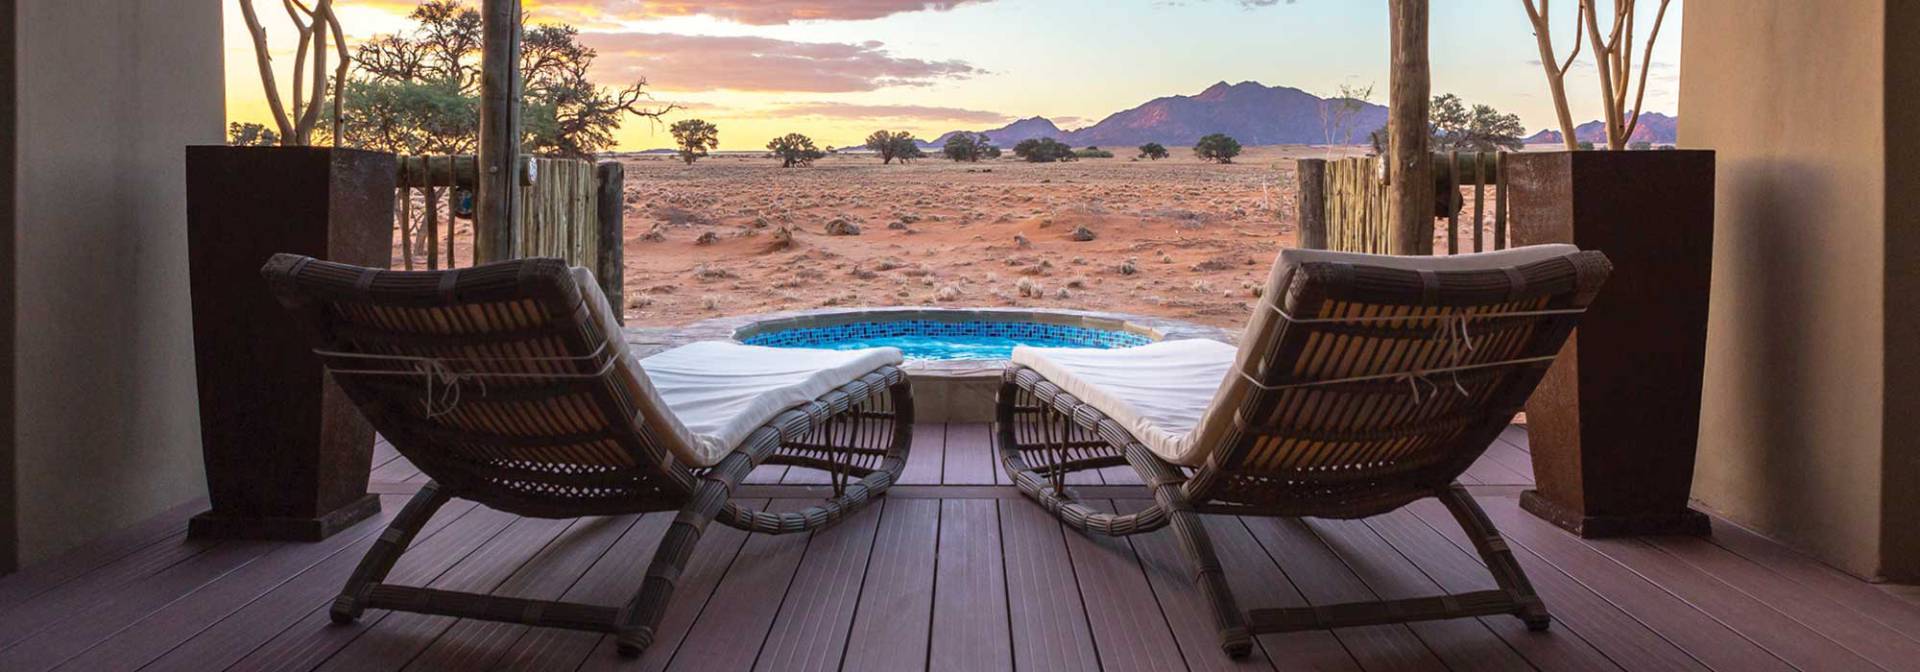 Wundervolle Lodge in Namibia